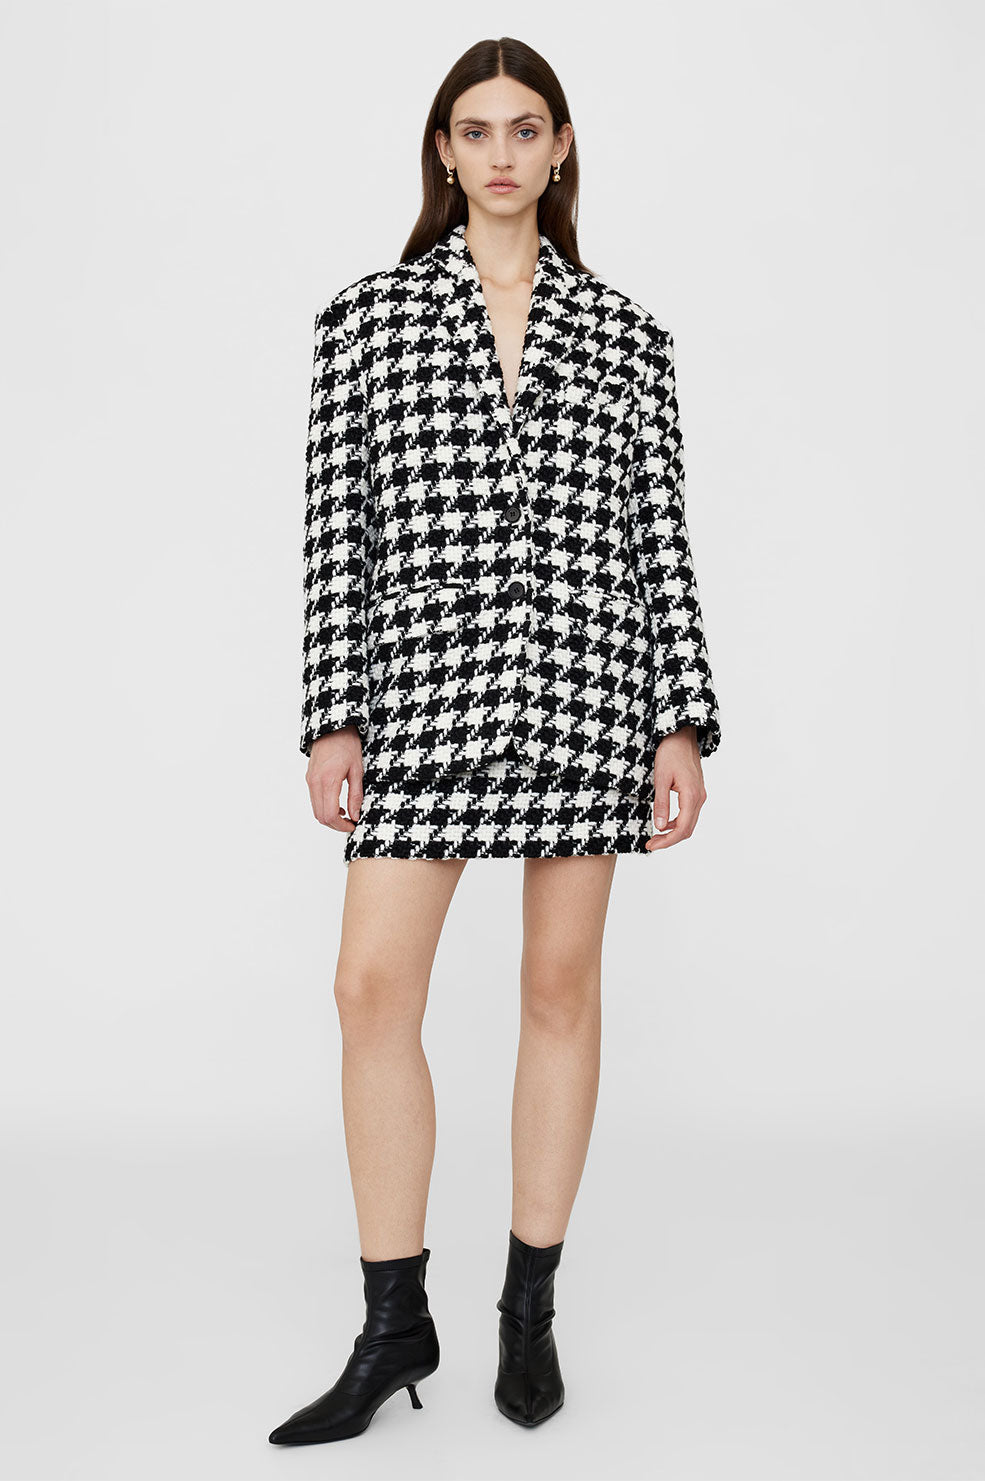 ANINE BING Ada Skirt - Black And White Houndstooth - On Model Front Second Image